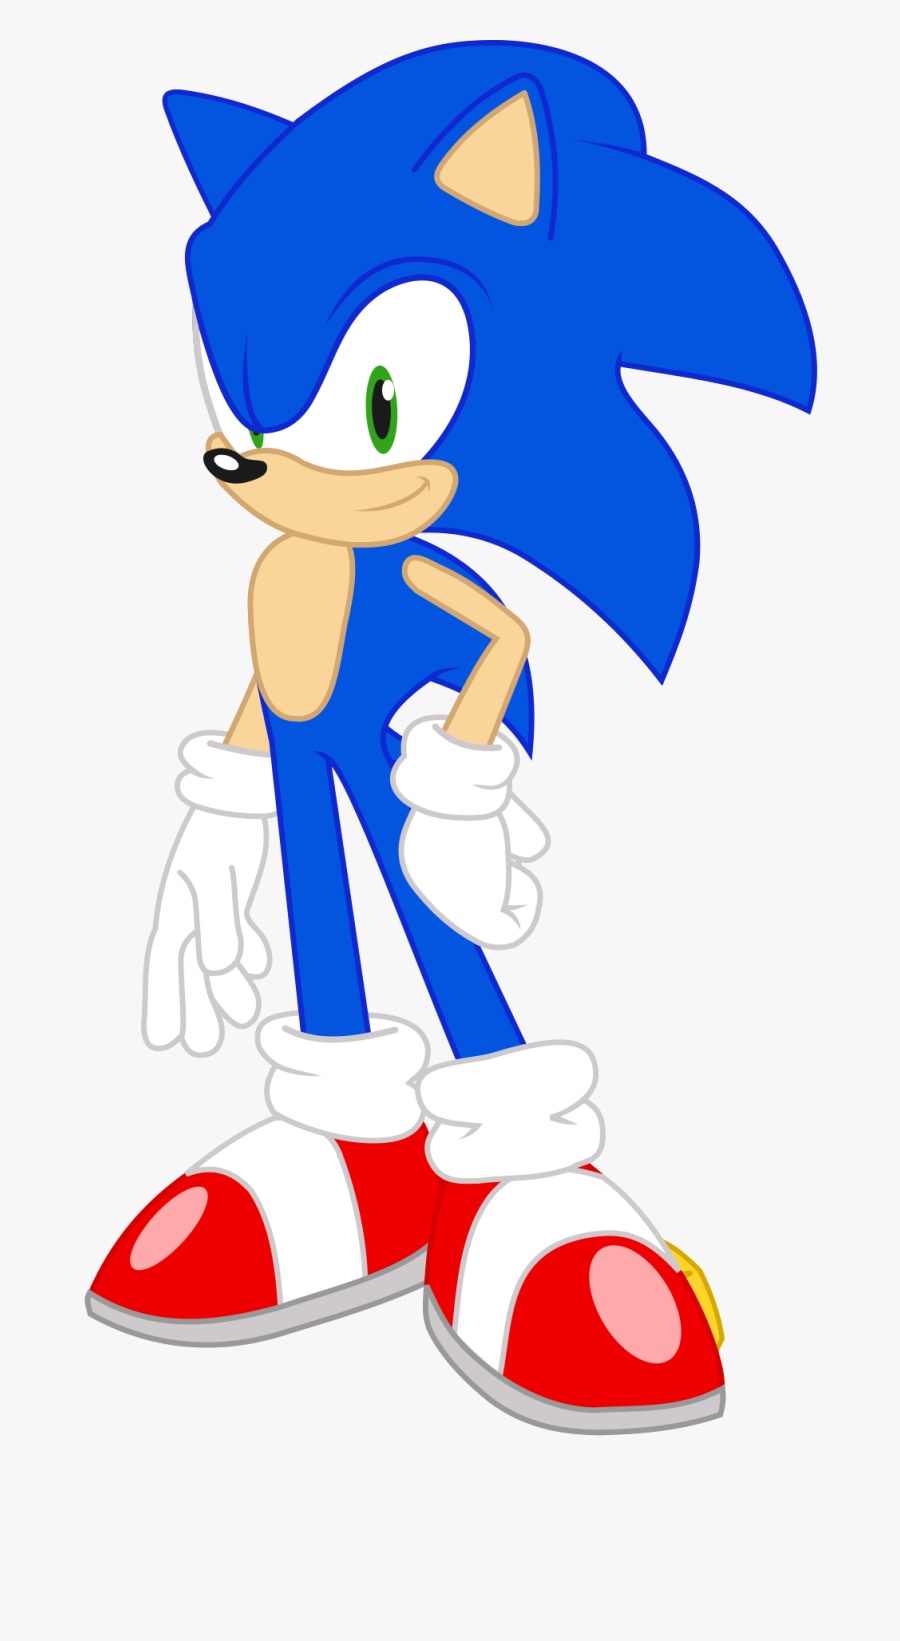 Sonic The Hedgehog - Sonic The Hedgehog Vector, Transparent Clipart